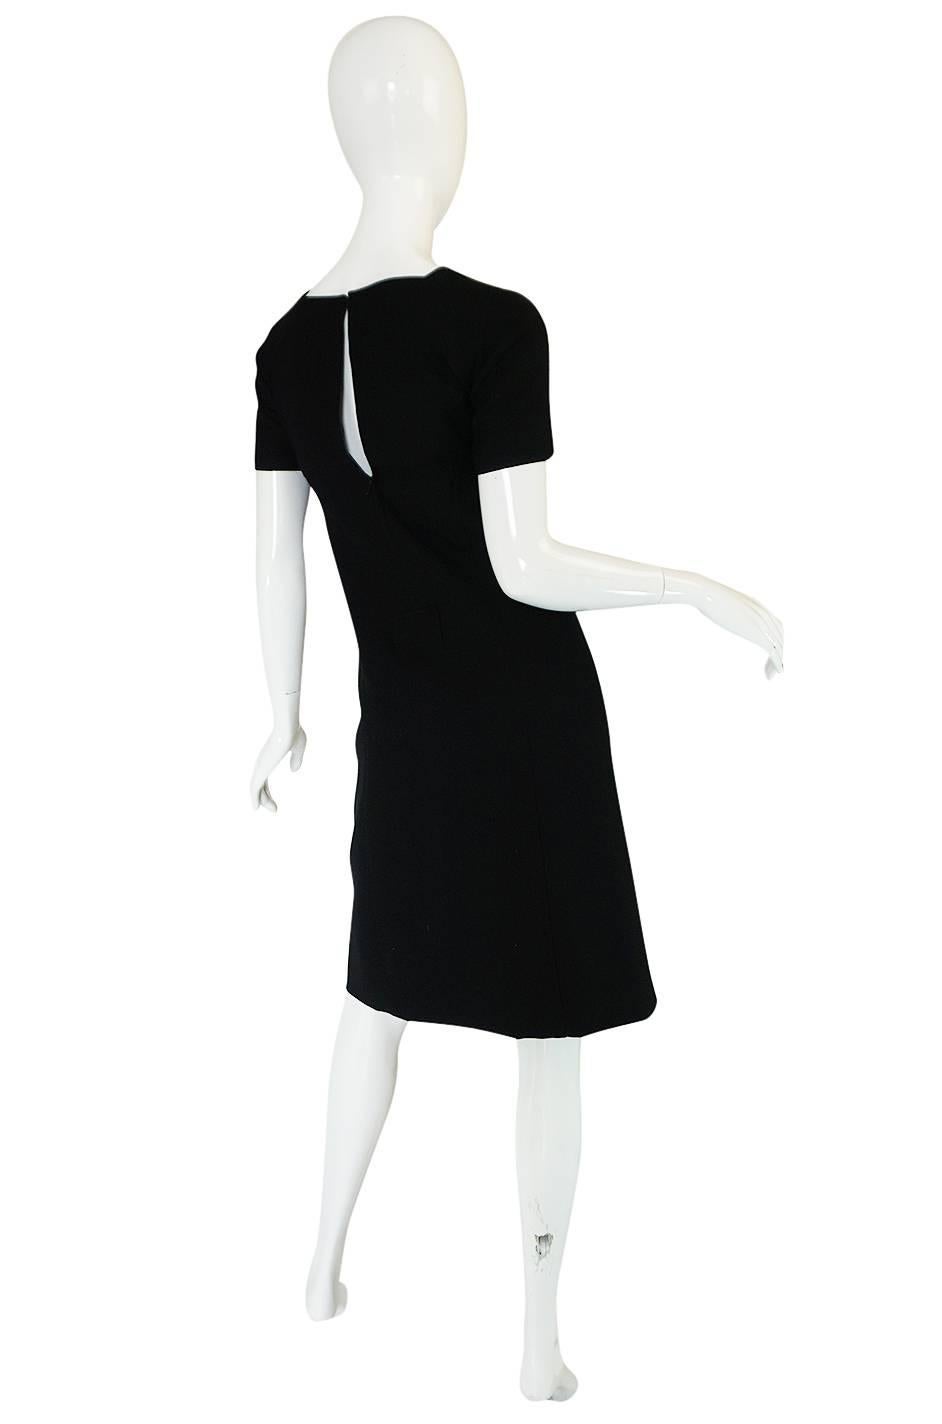 I have had the twin of this dress in the past and its as good now as the first time. This is a fabulous little black Courreges shift dresses and it is one of his classic designs. The fabric is jet black, light wool with a fine ribbed texture running